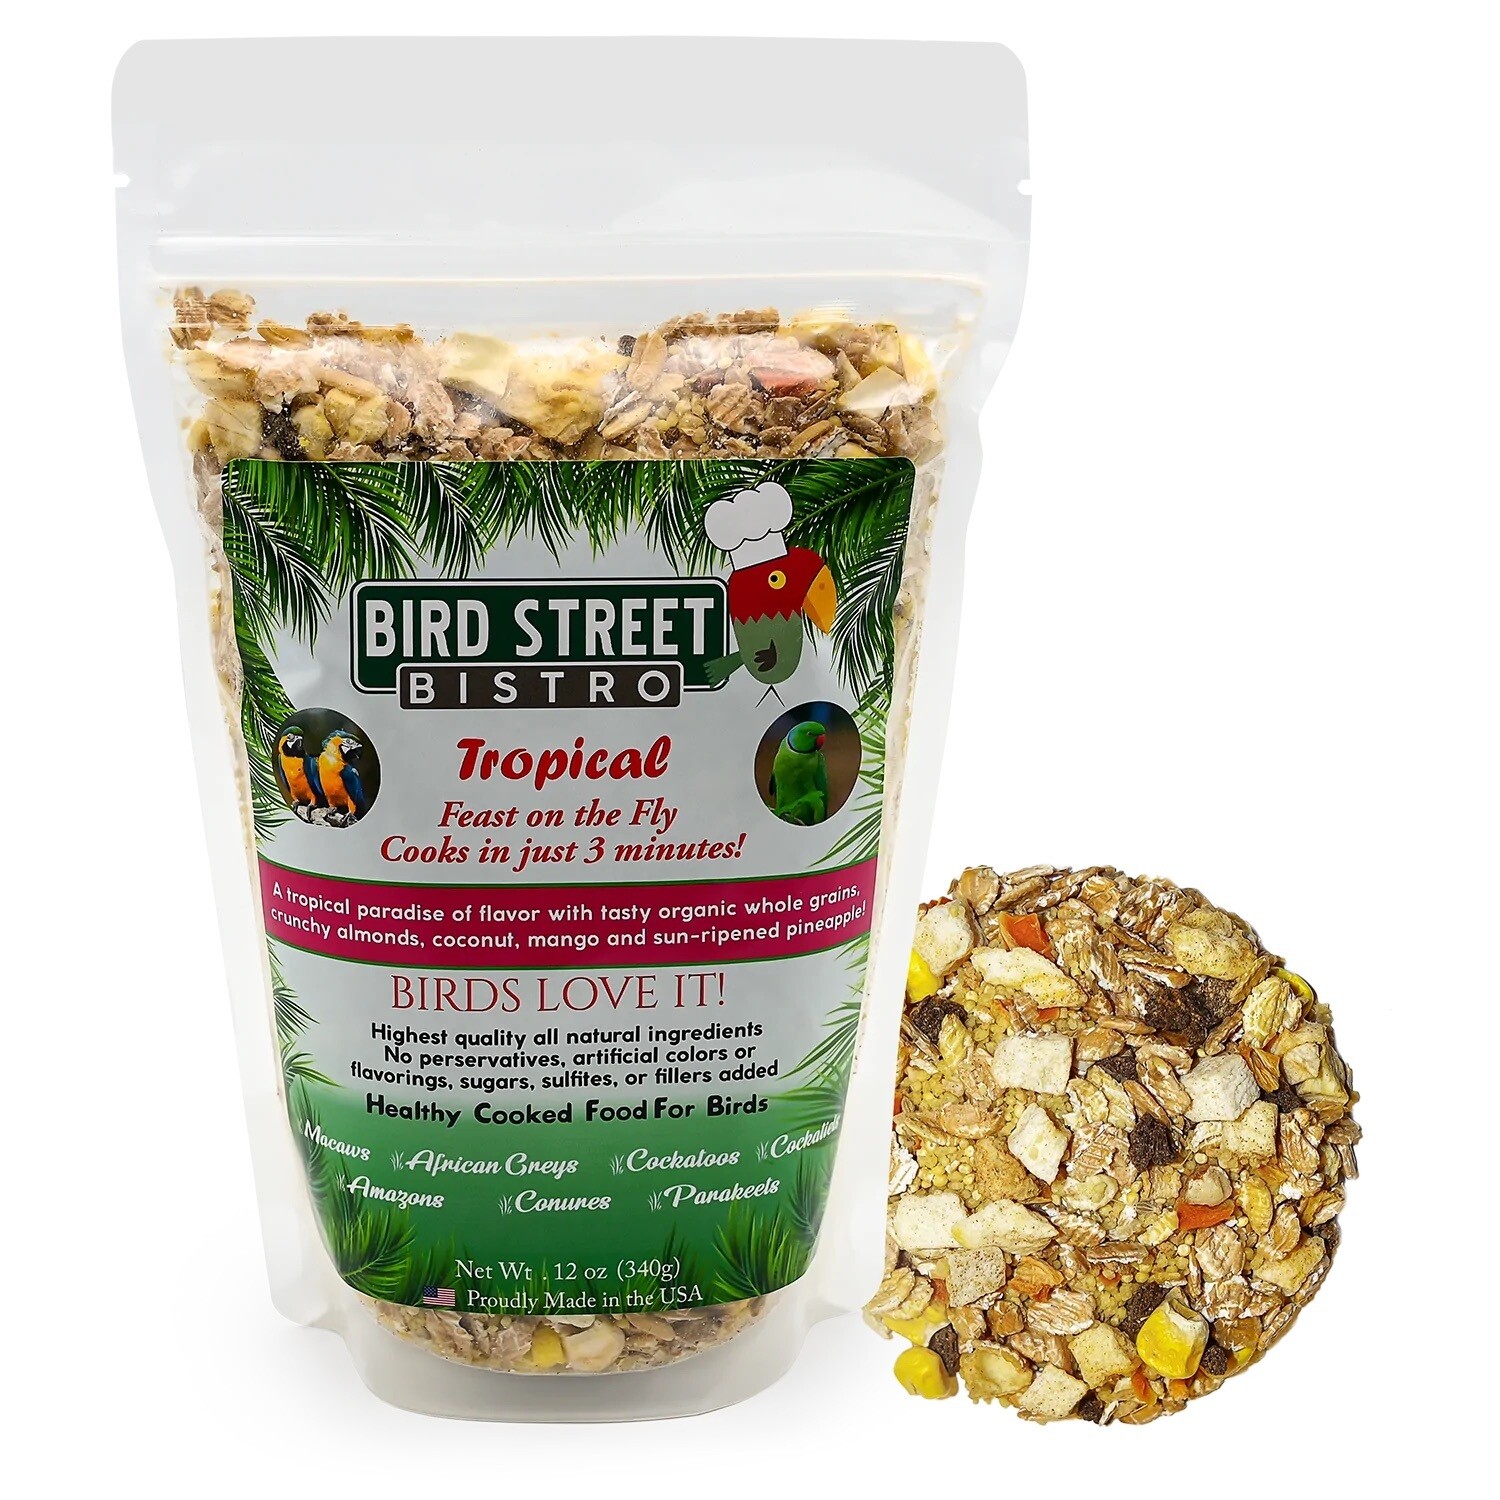 Tropical Feast on the Fly - A tropical paradise of flavor with tasty organic whole grains, crunchy almonds, coconut, mango, and sun-ripened pineapple! - 11 oz